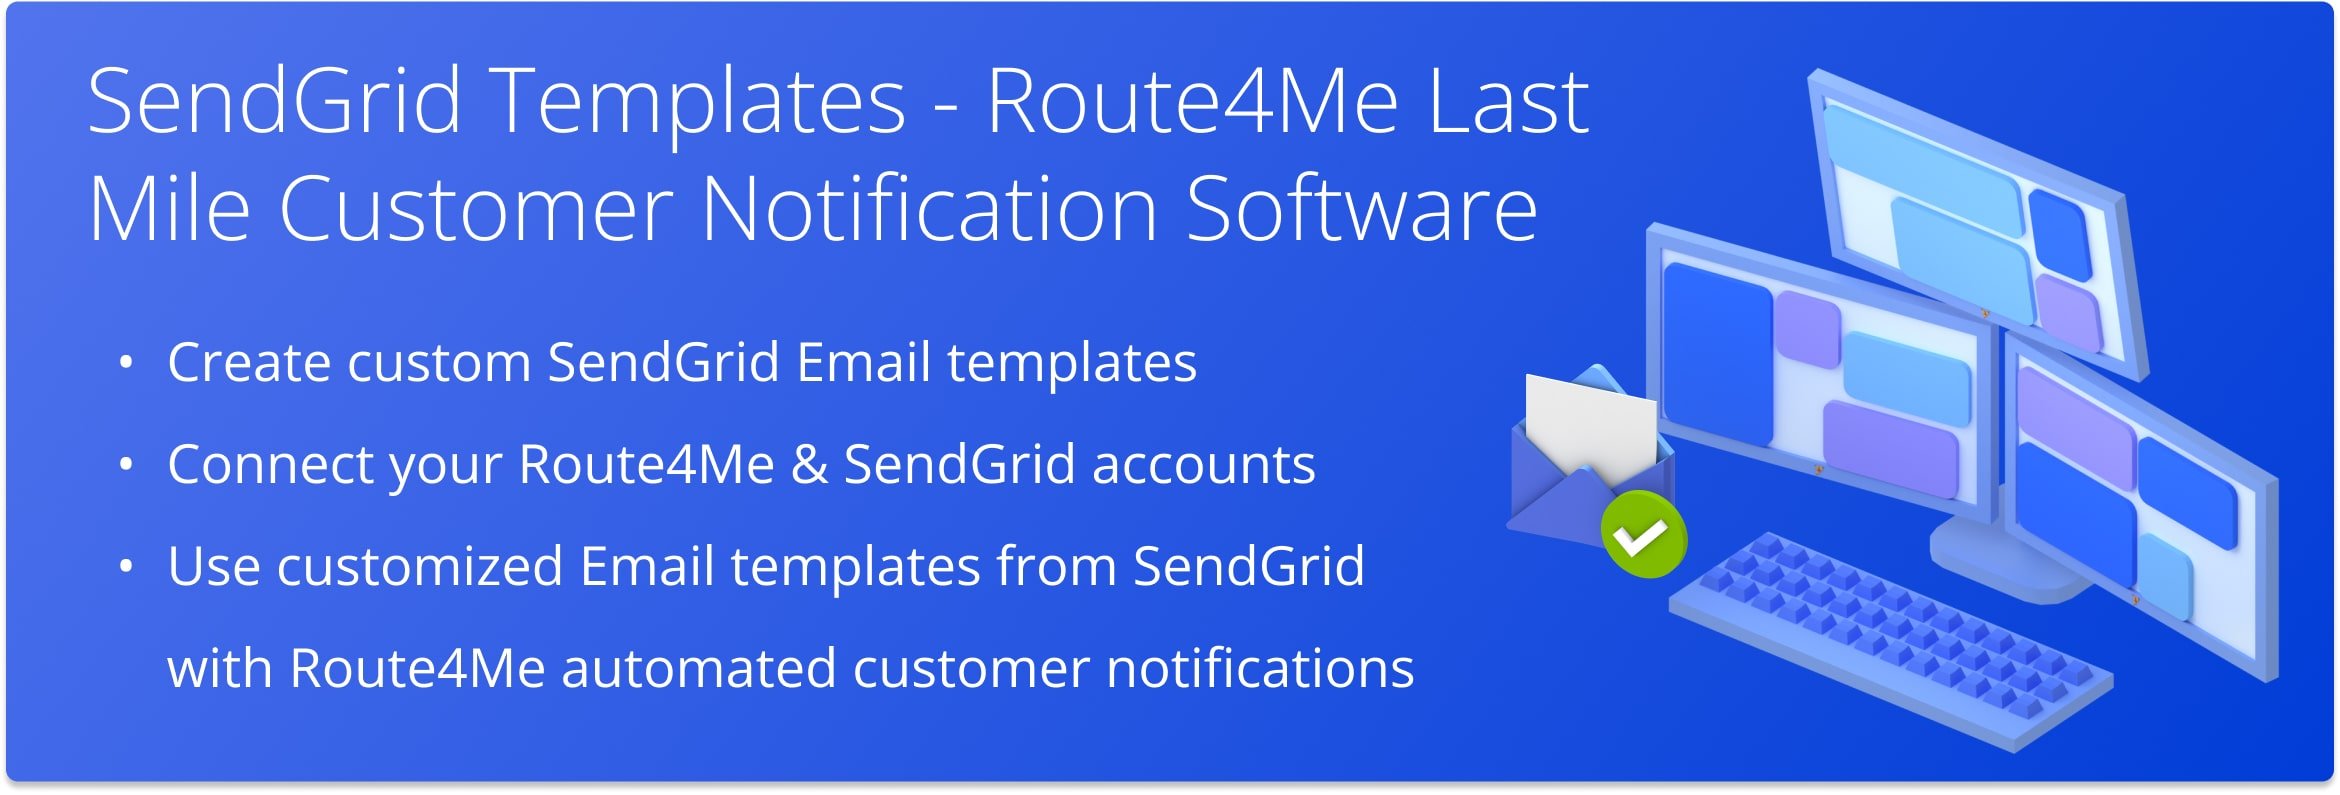 Use white-labeled customized SendGrid Email templates with Route4Me automated customer Email alerts and notifications.